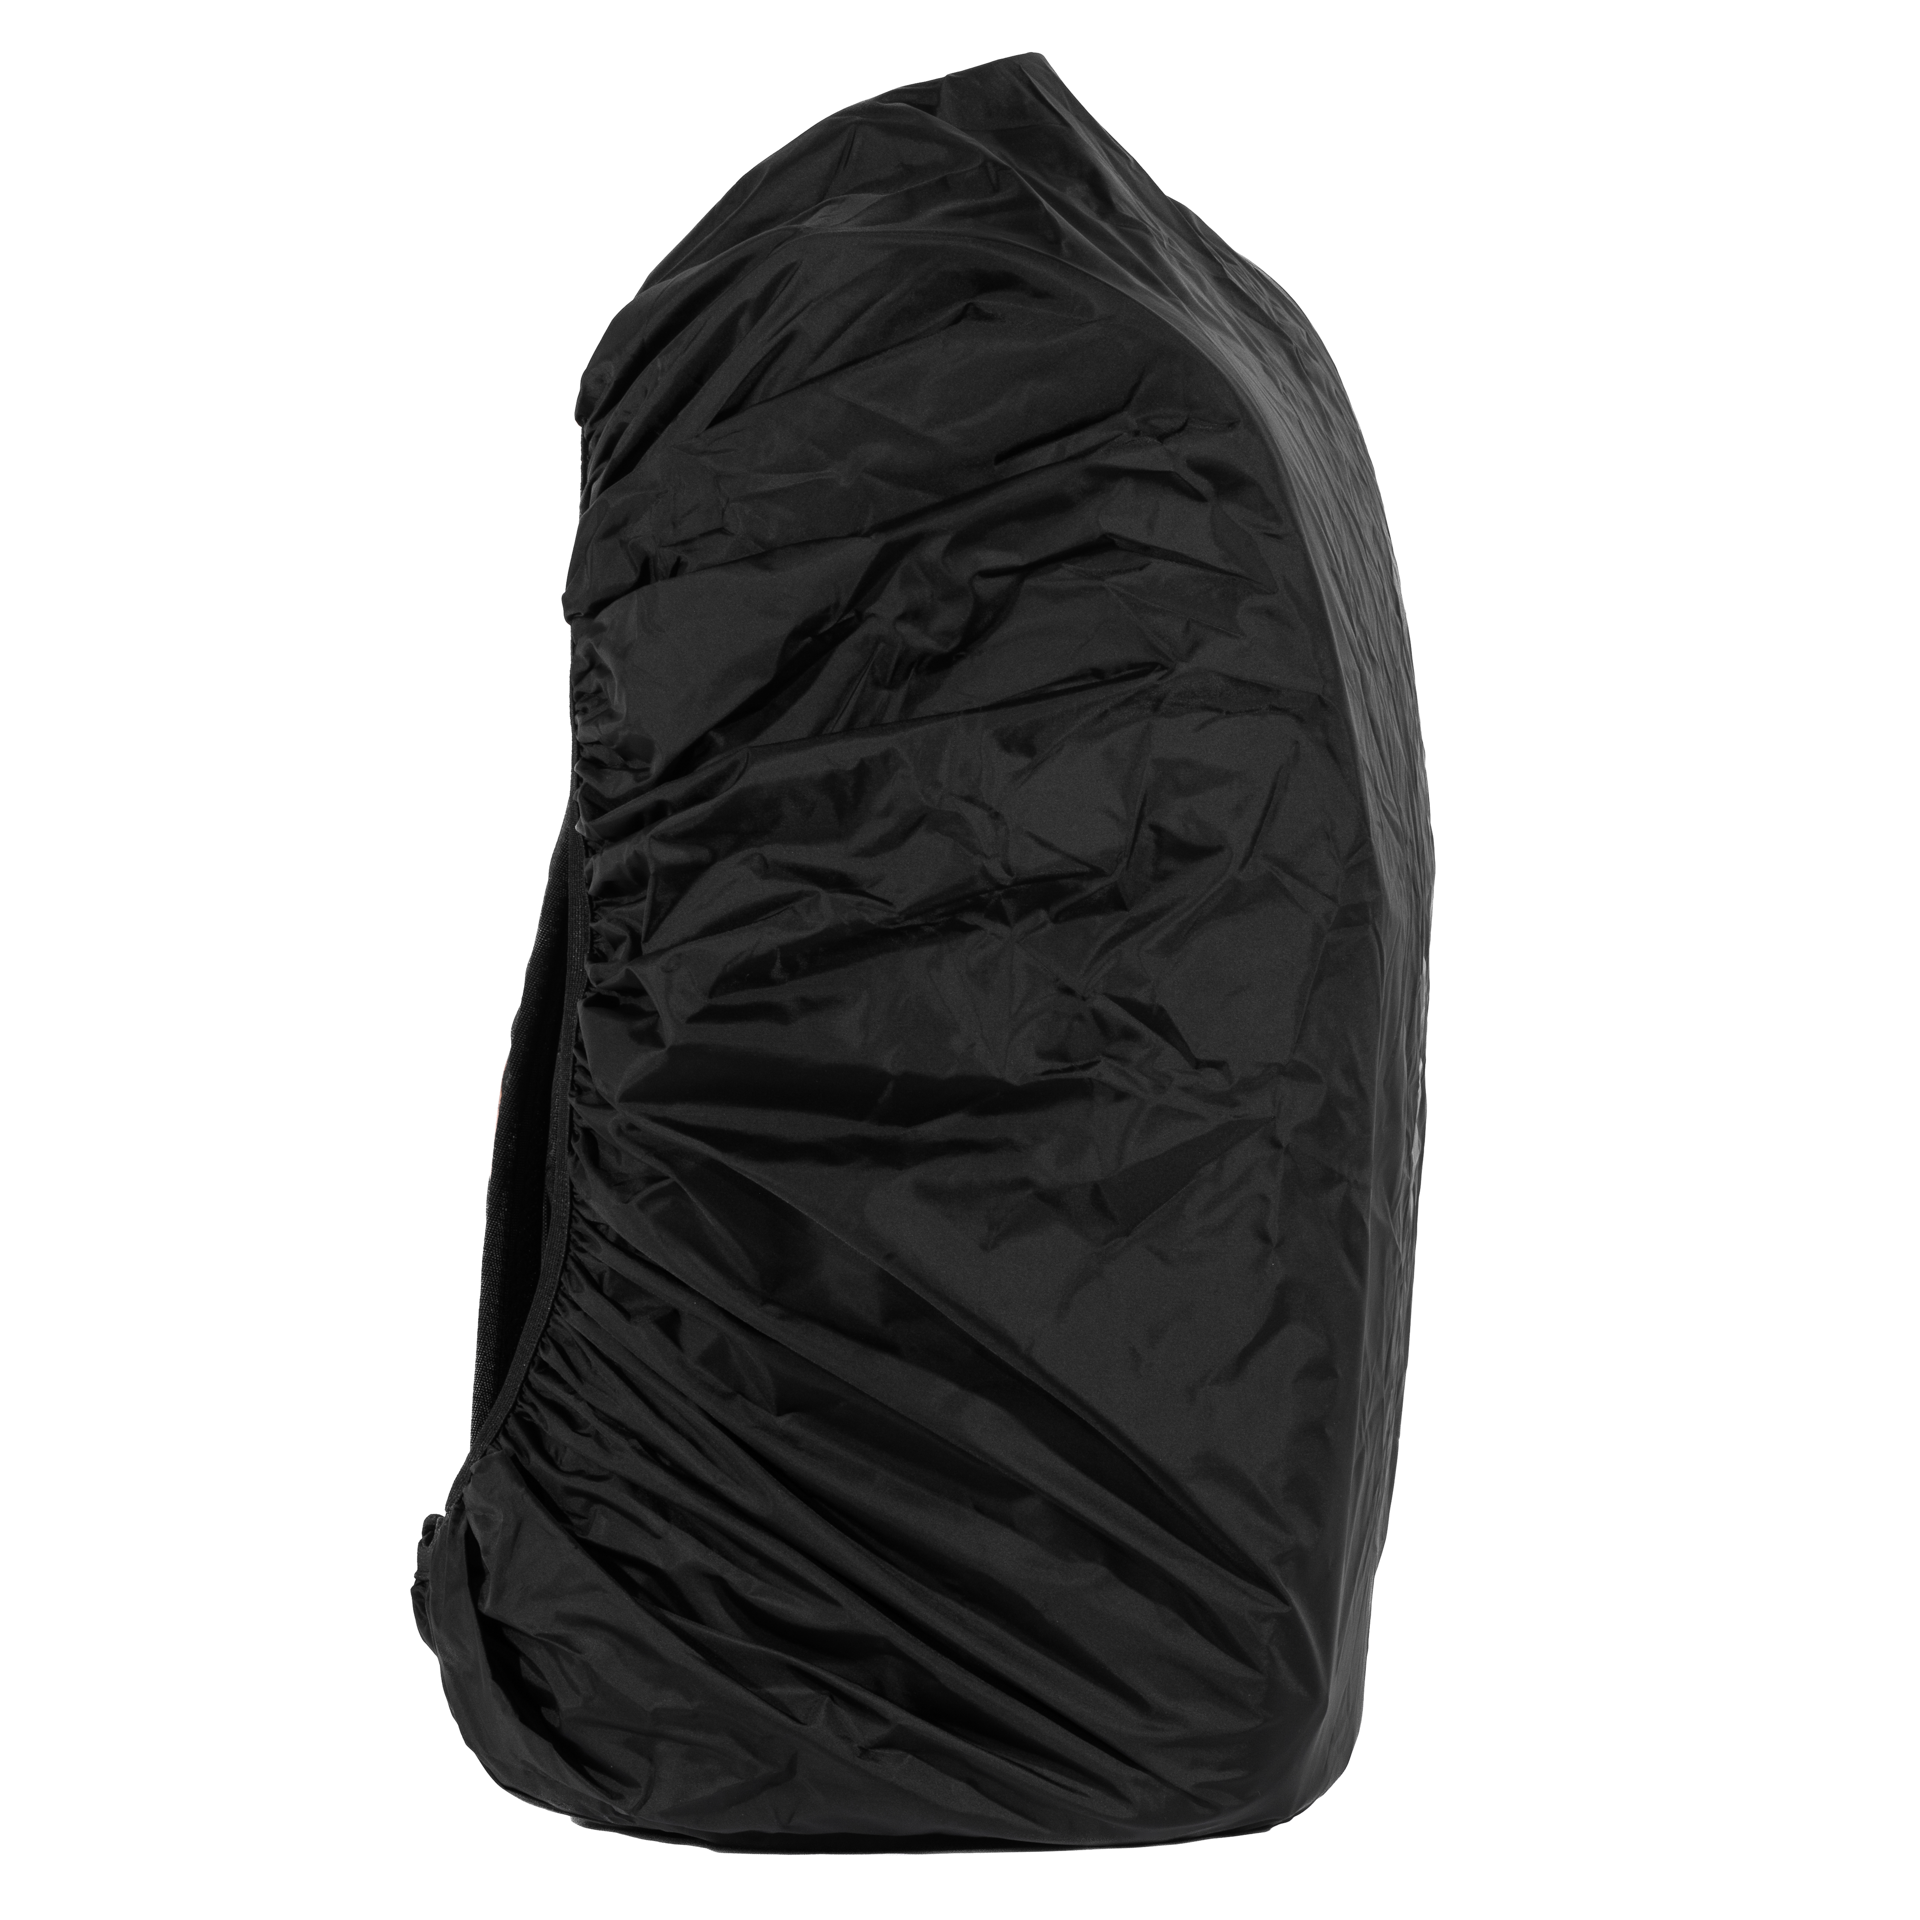 The Original Backpack Rainfly